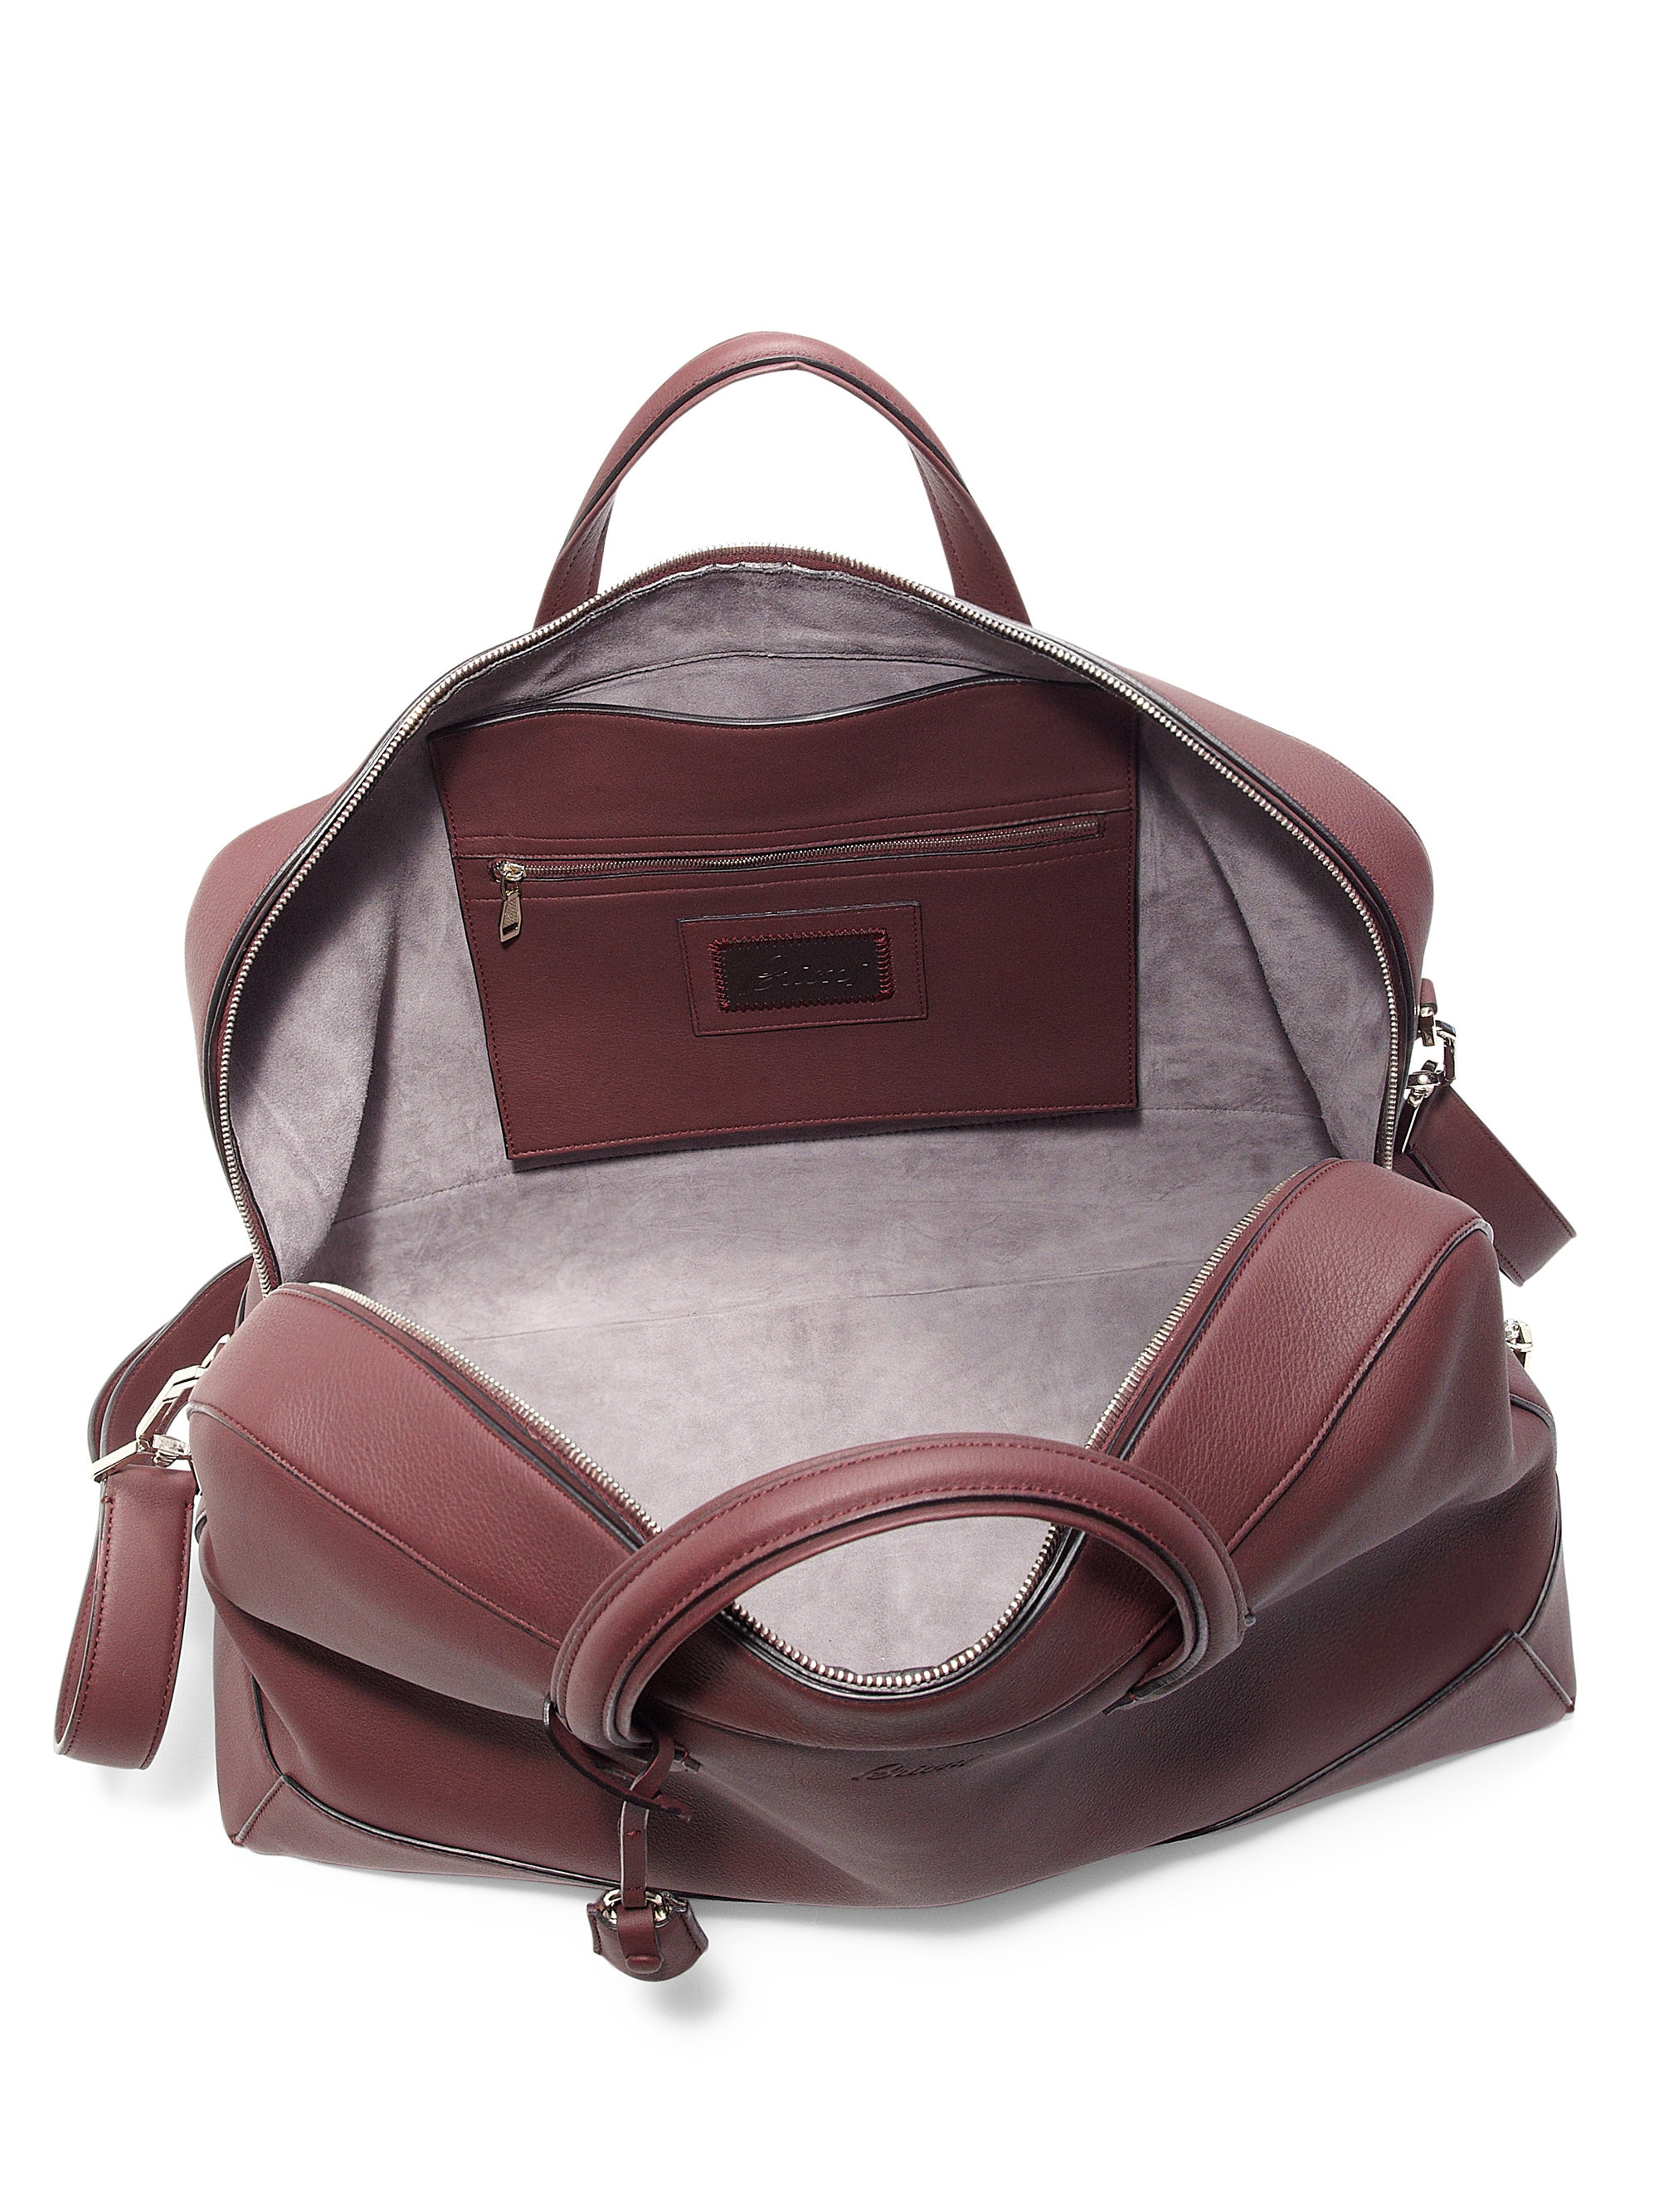 Brioni Leather Duffle Bag in Purple for Men - Lyst